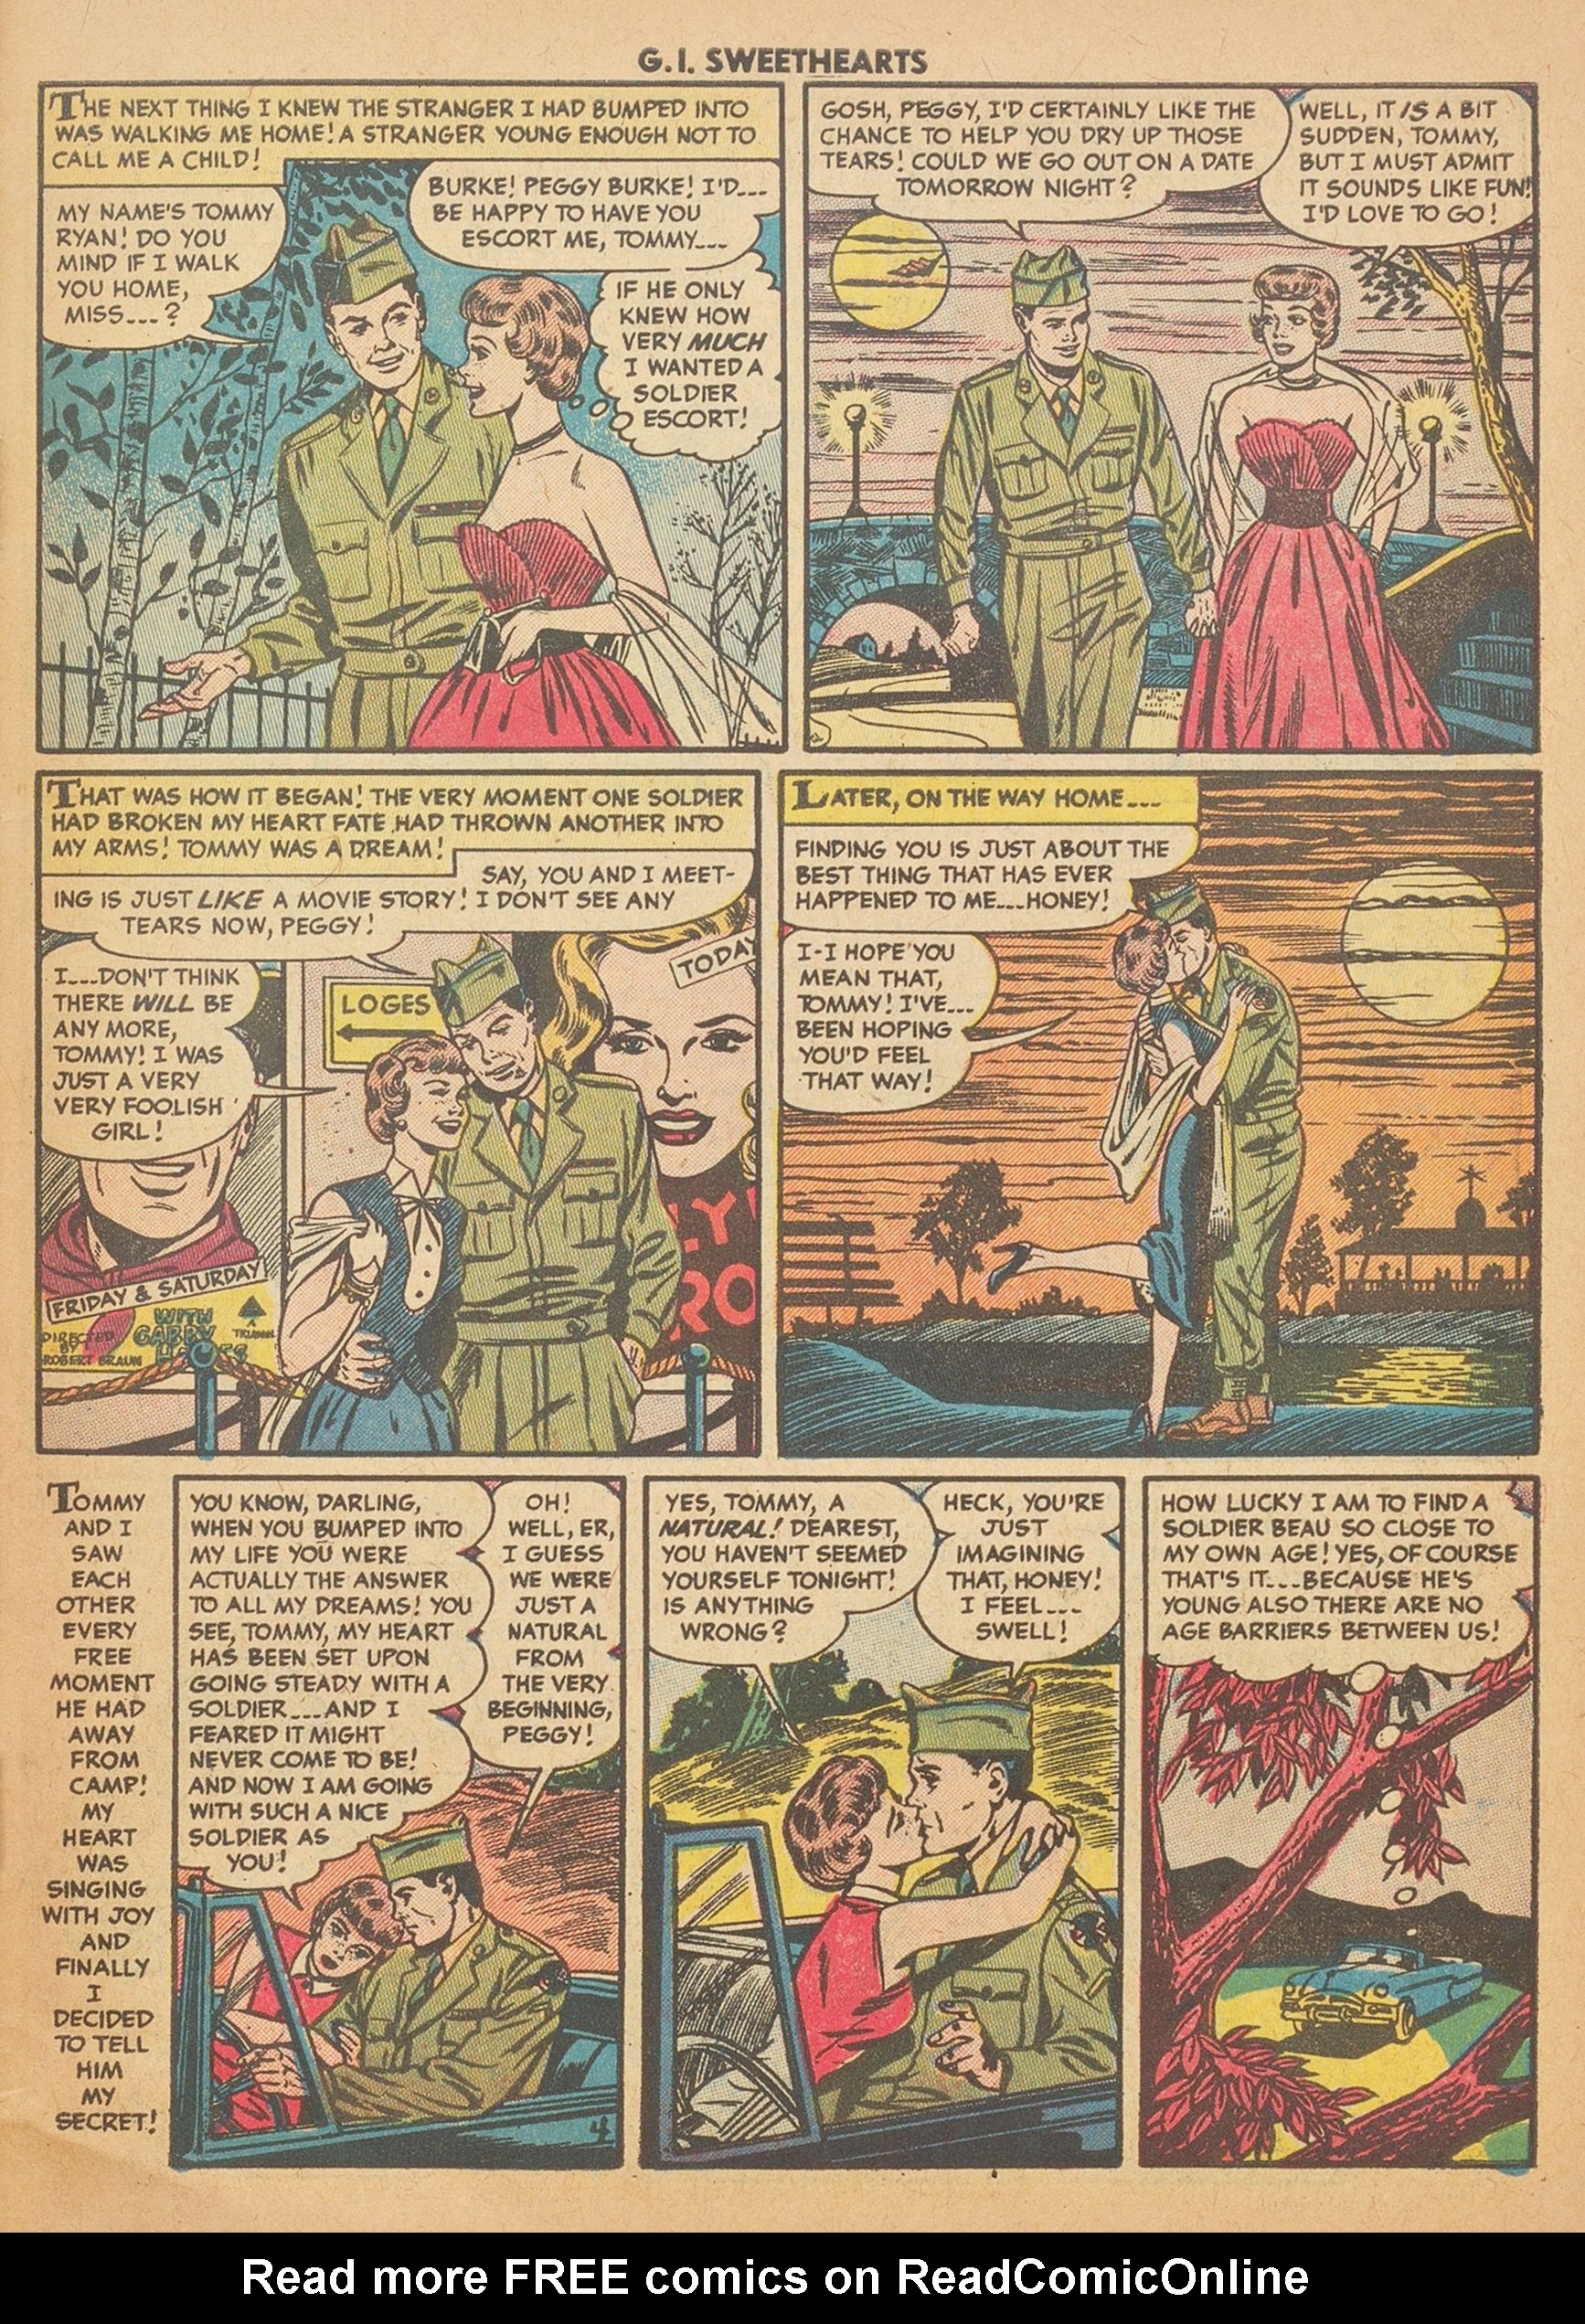 Read online G.I. Sweethearts comic -  Issue #44 - 31